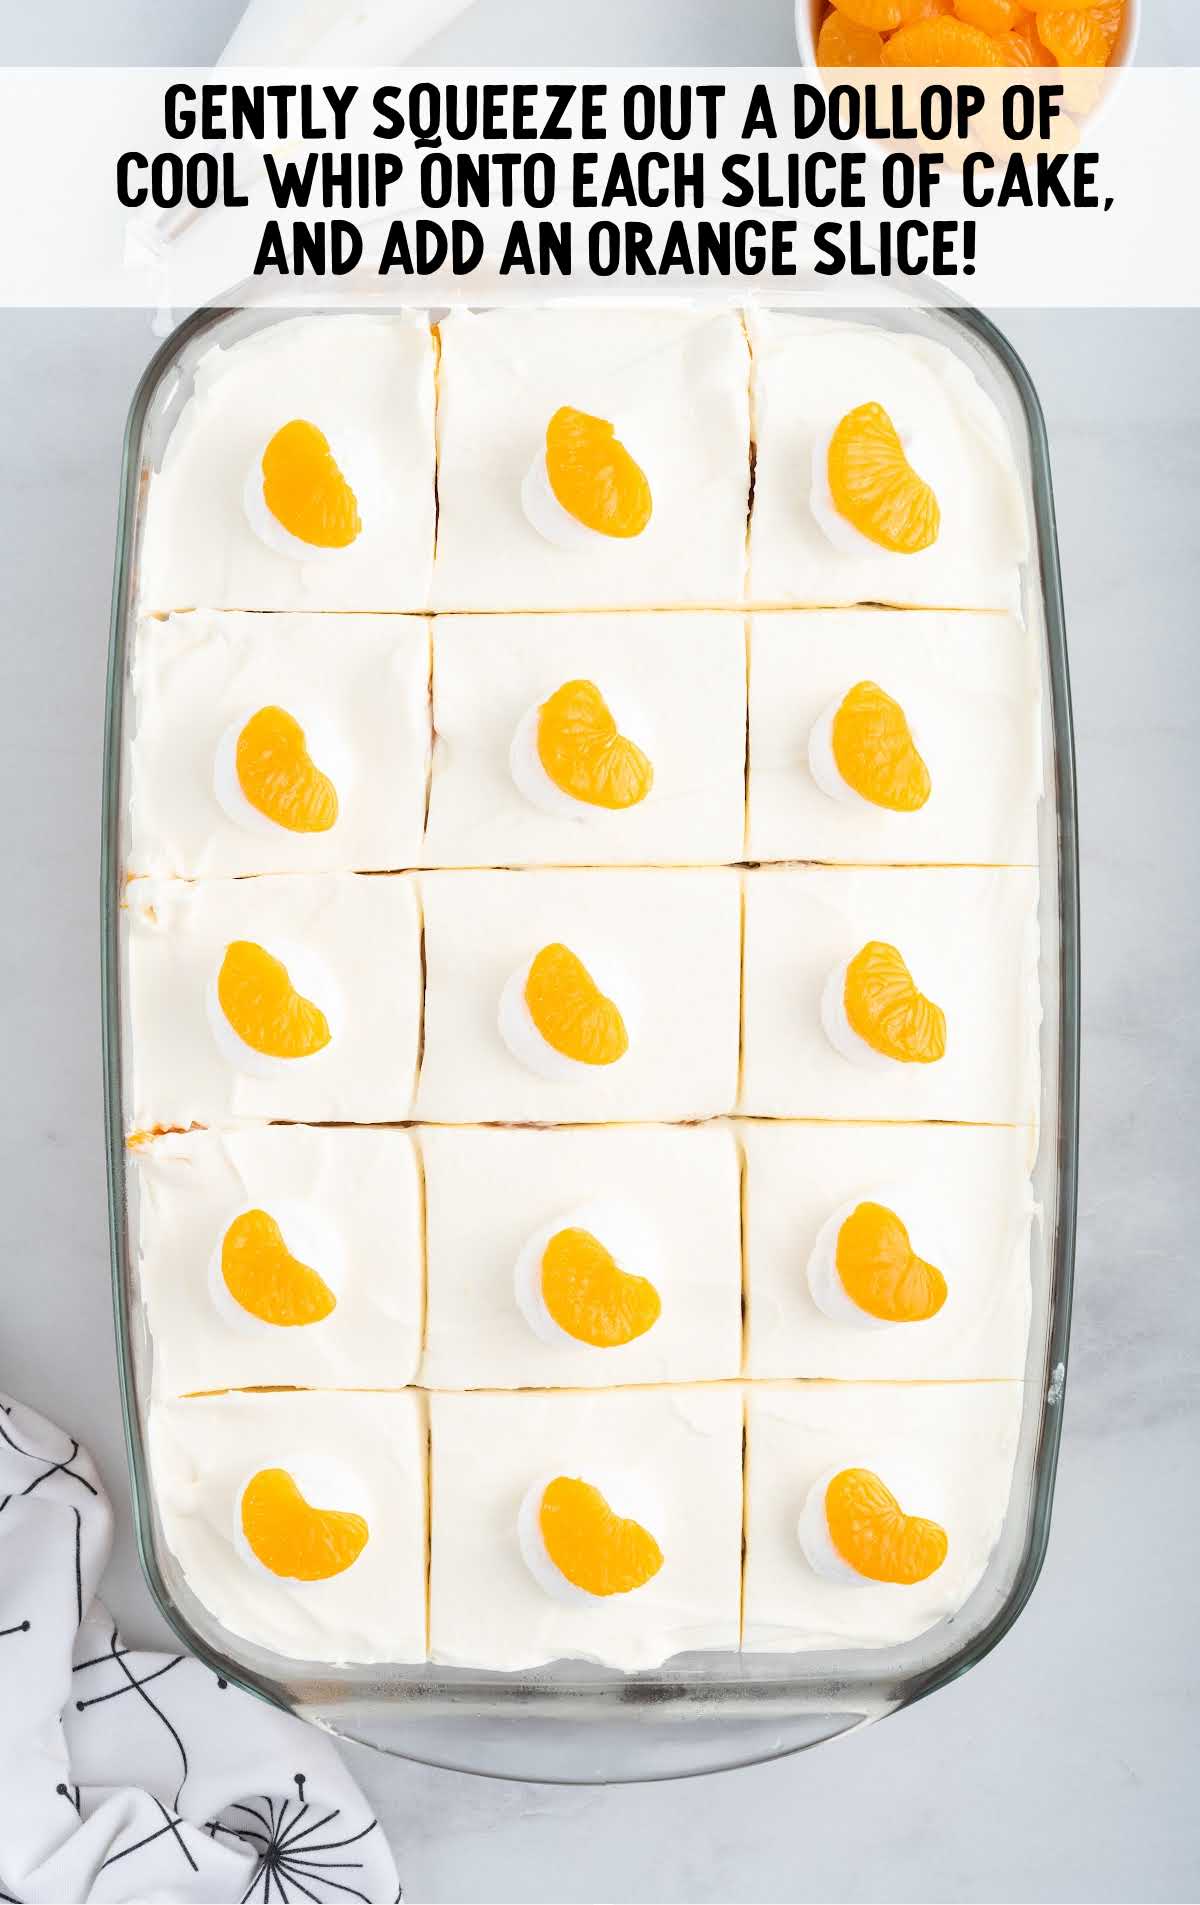 cool whip and orange slices added to the cake in a baking dish